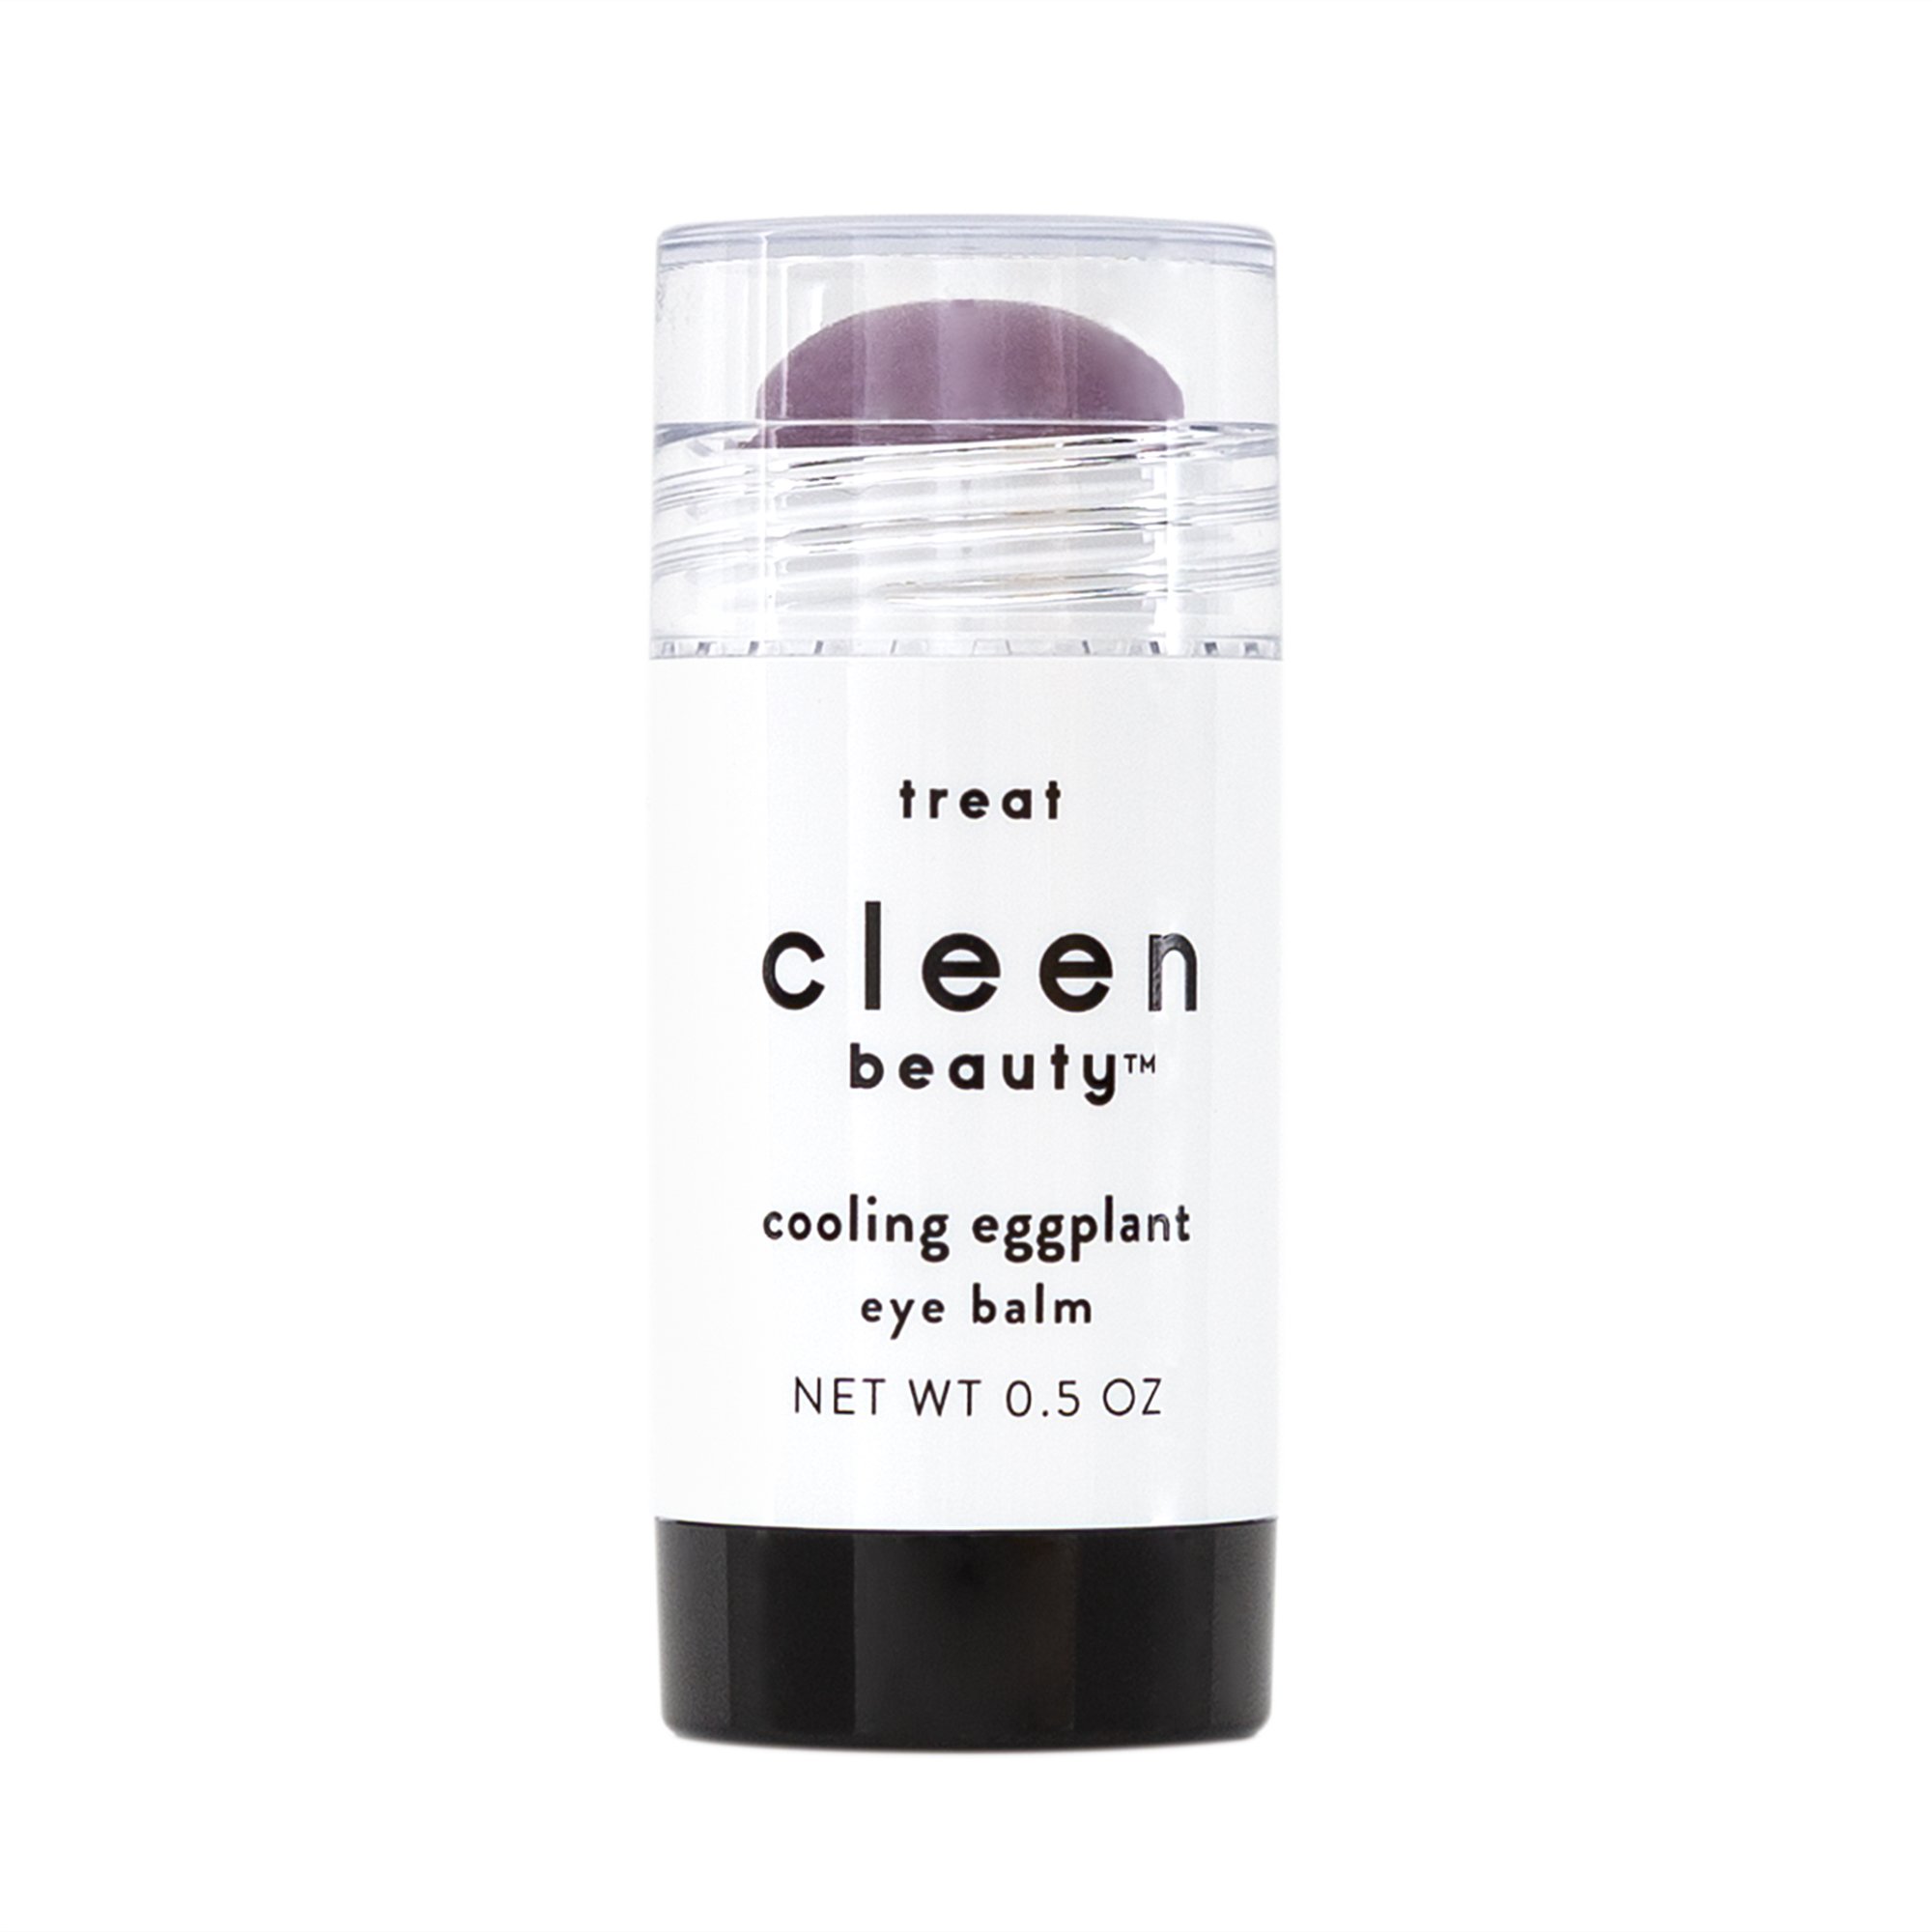 cleen beauty Cooling Eye Balm with Eggplant & Coffee Oil, 0.5 oz - image 1 of 7